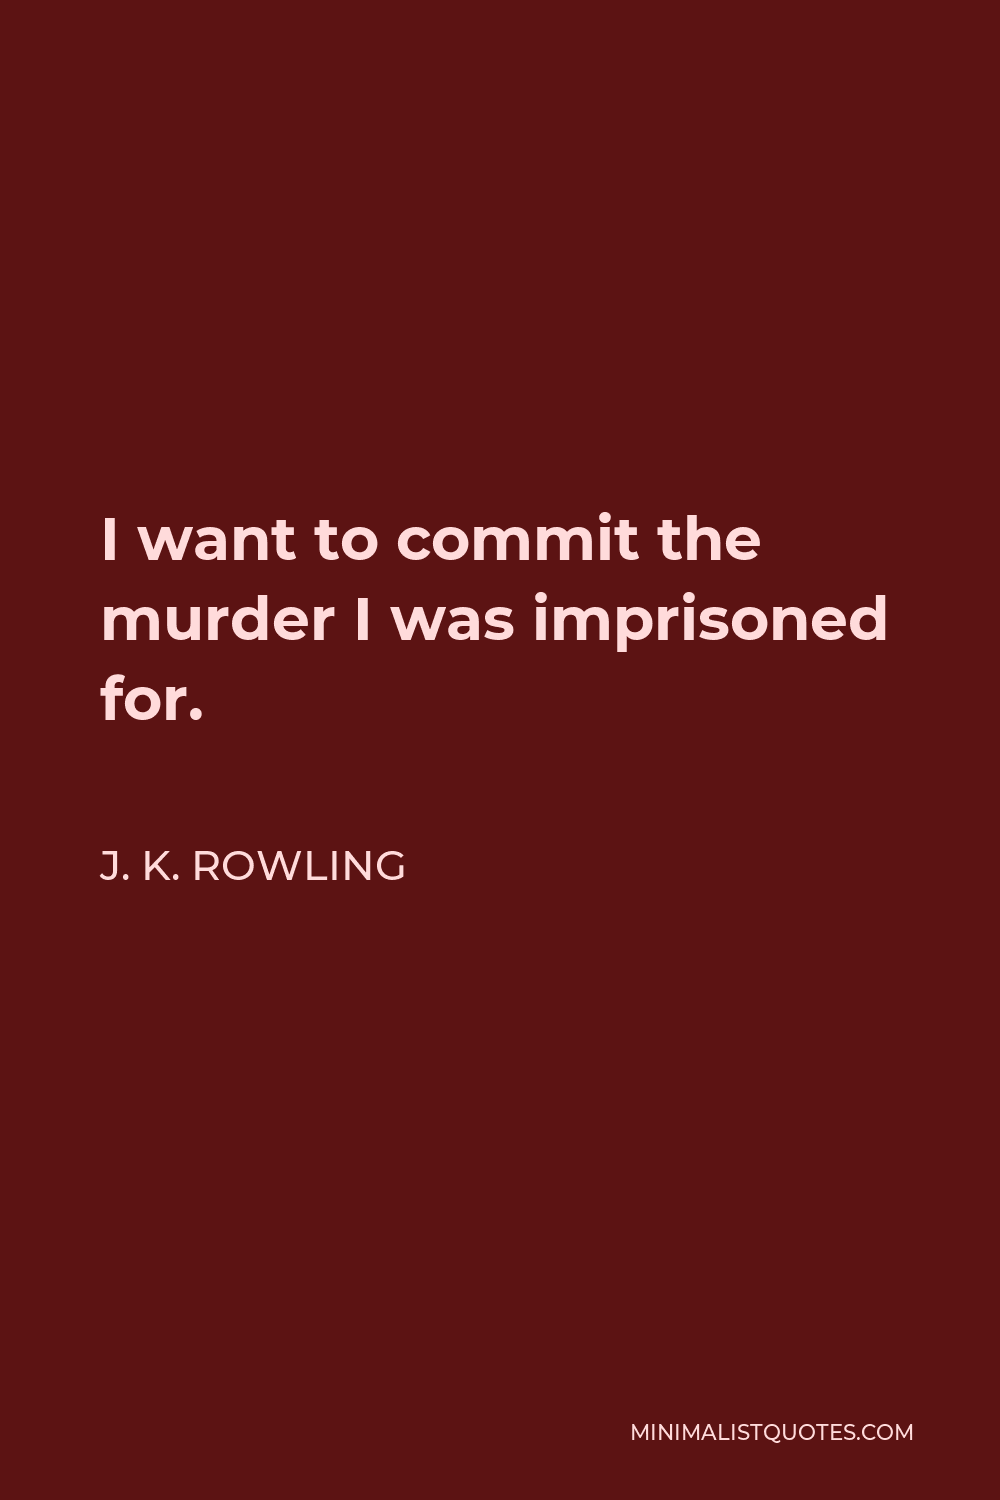 J. K. Rowling Quote - I want to commit the murder I was imprisoned for.